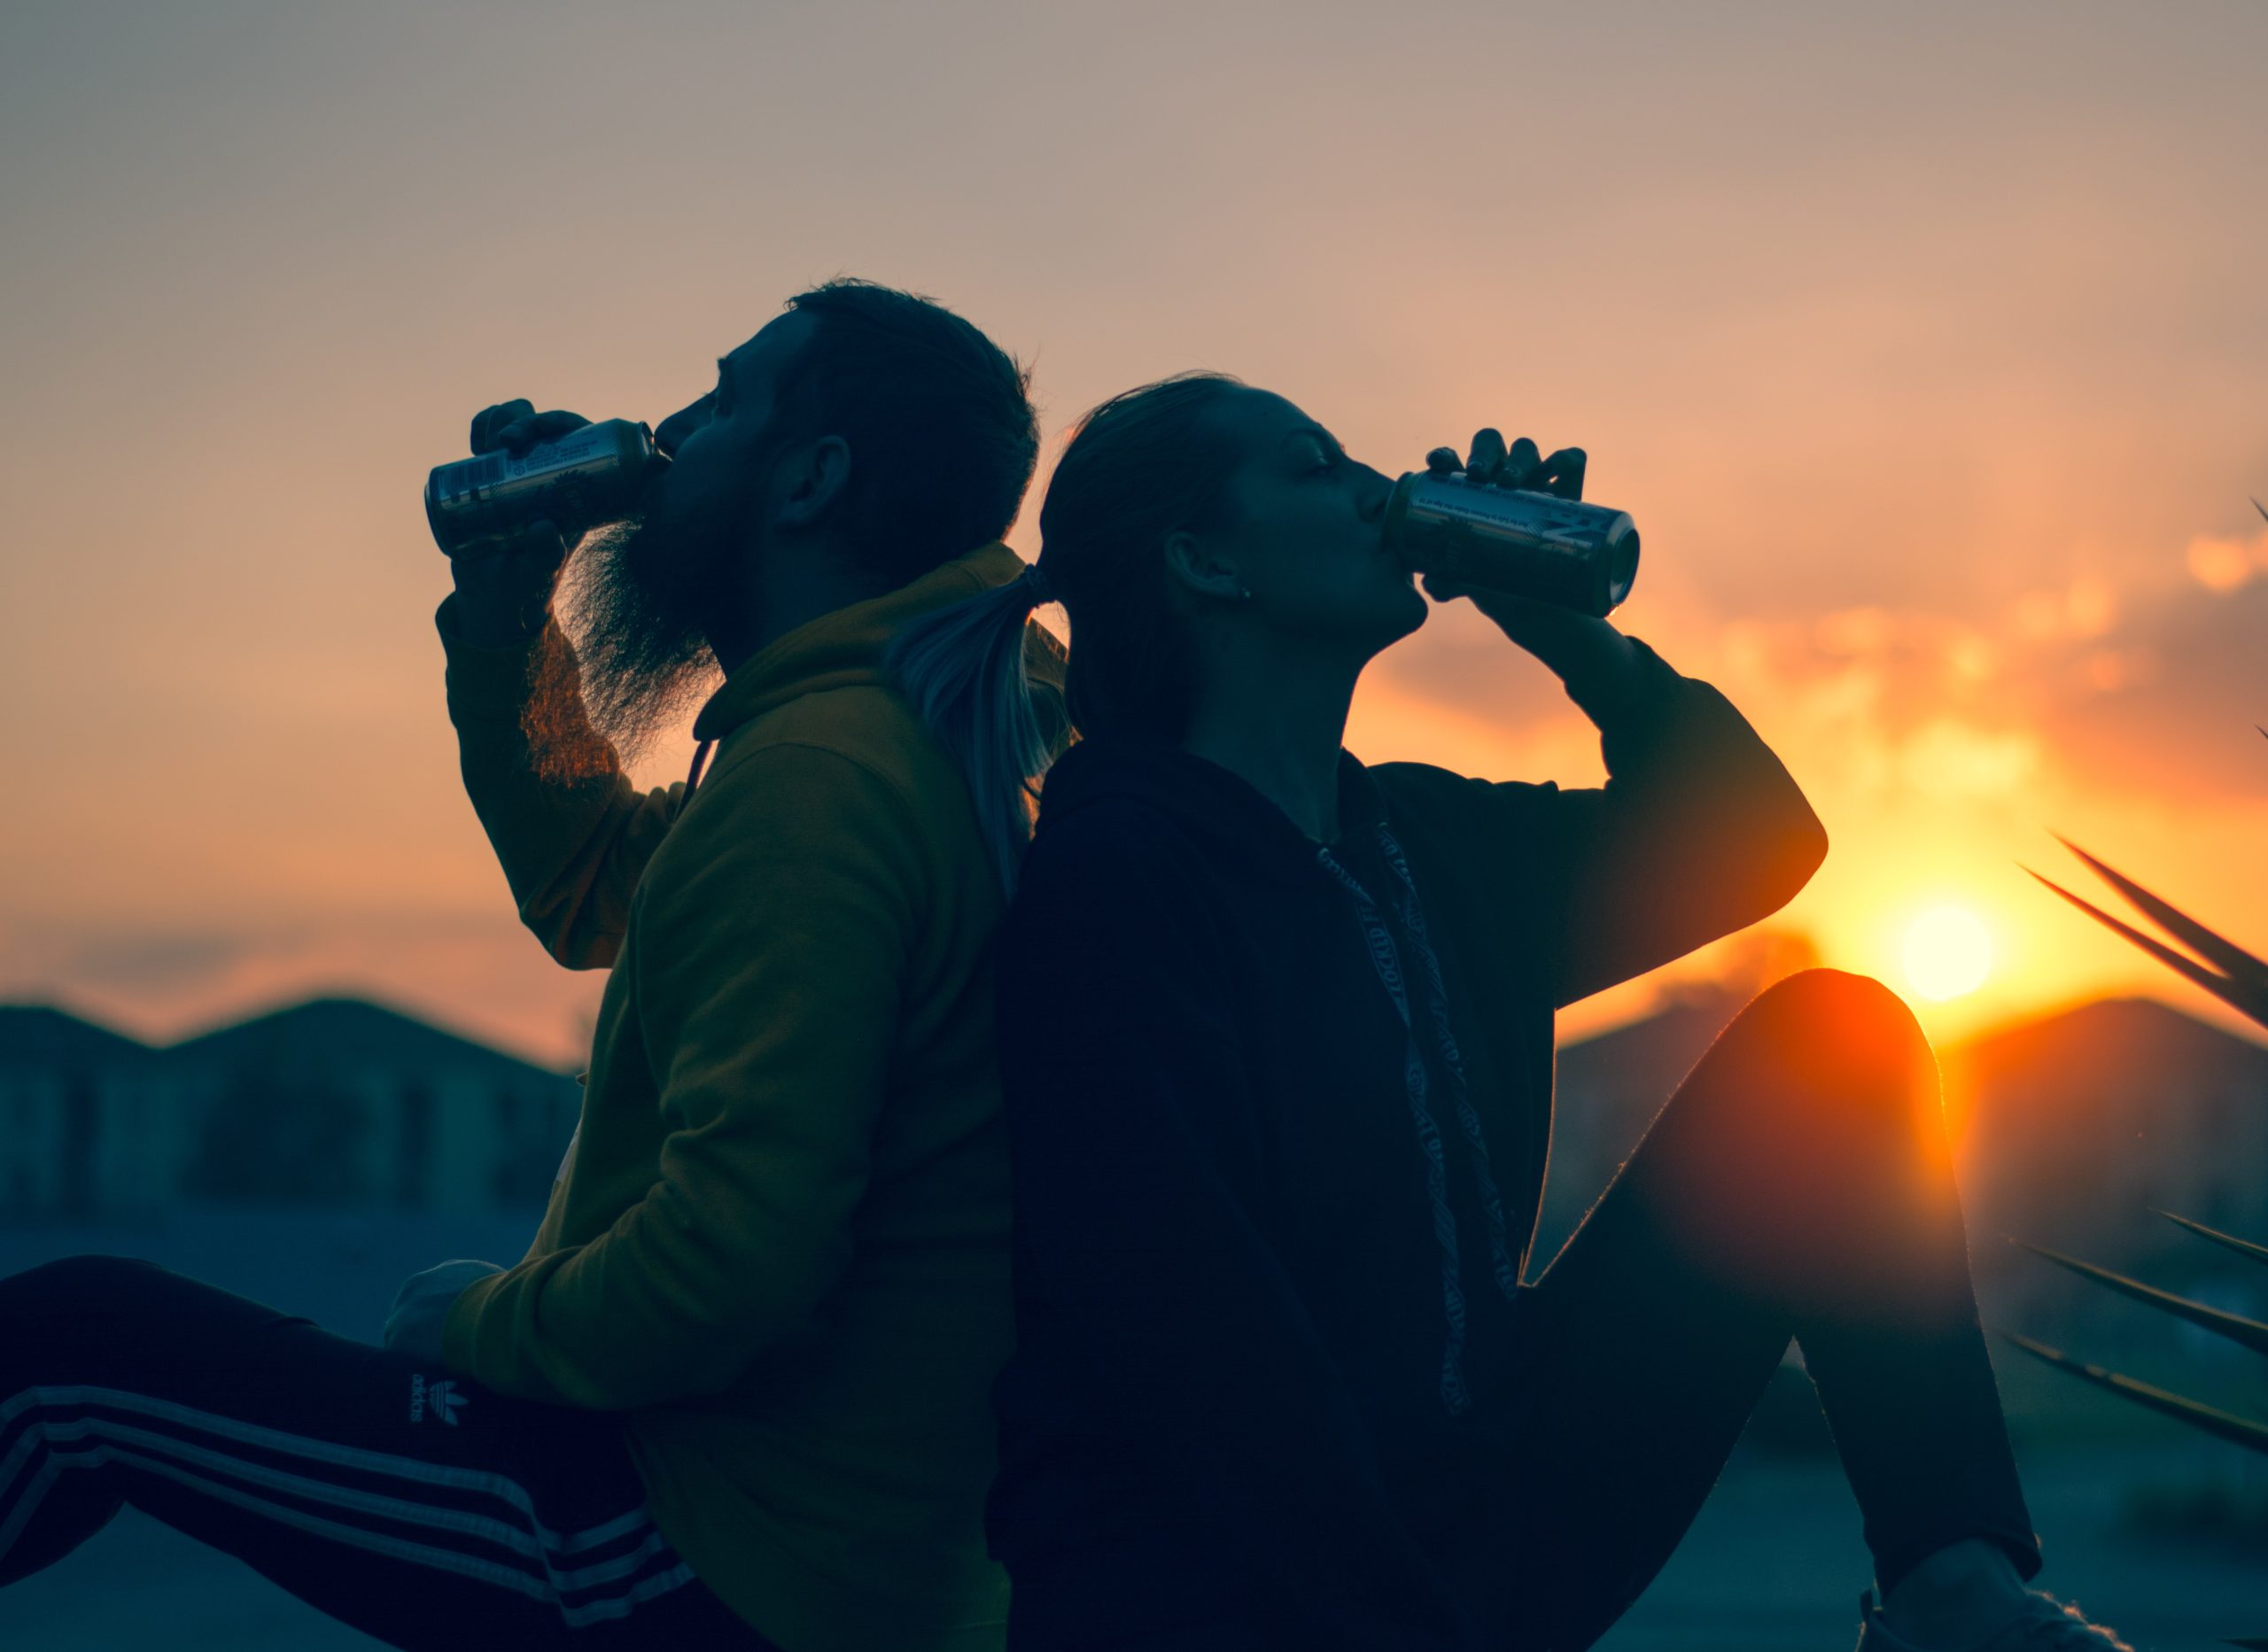 two young people drinking beer during while the sun goes down sunset